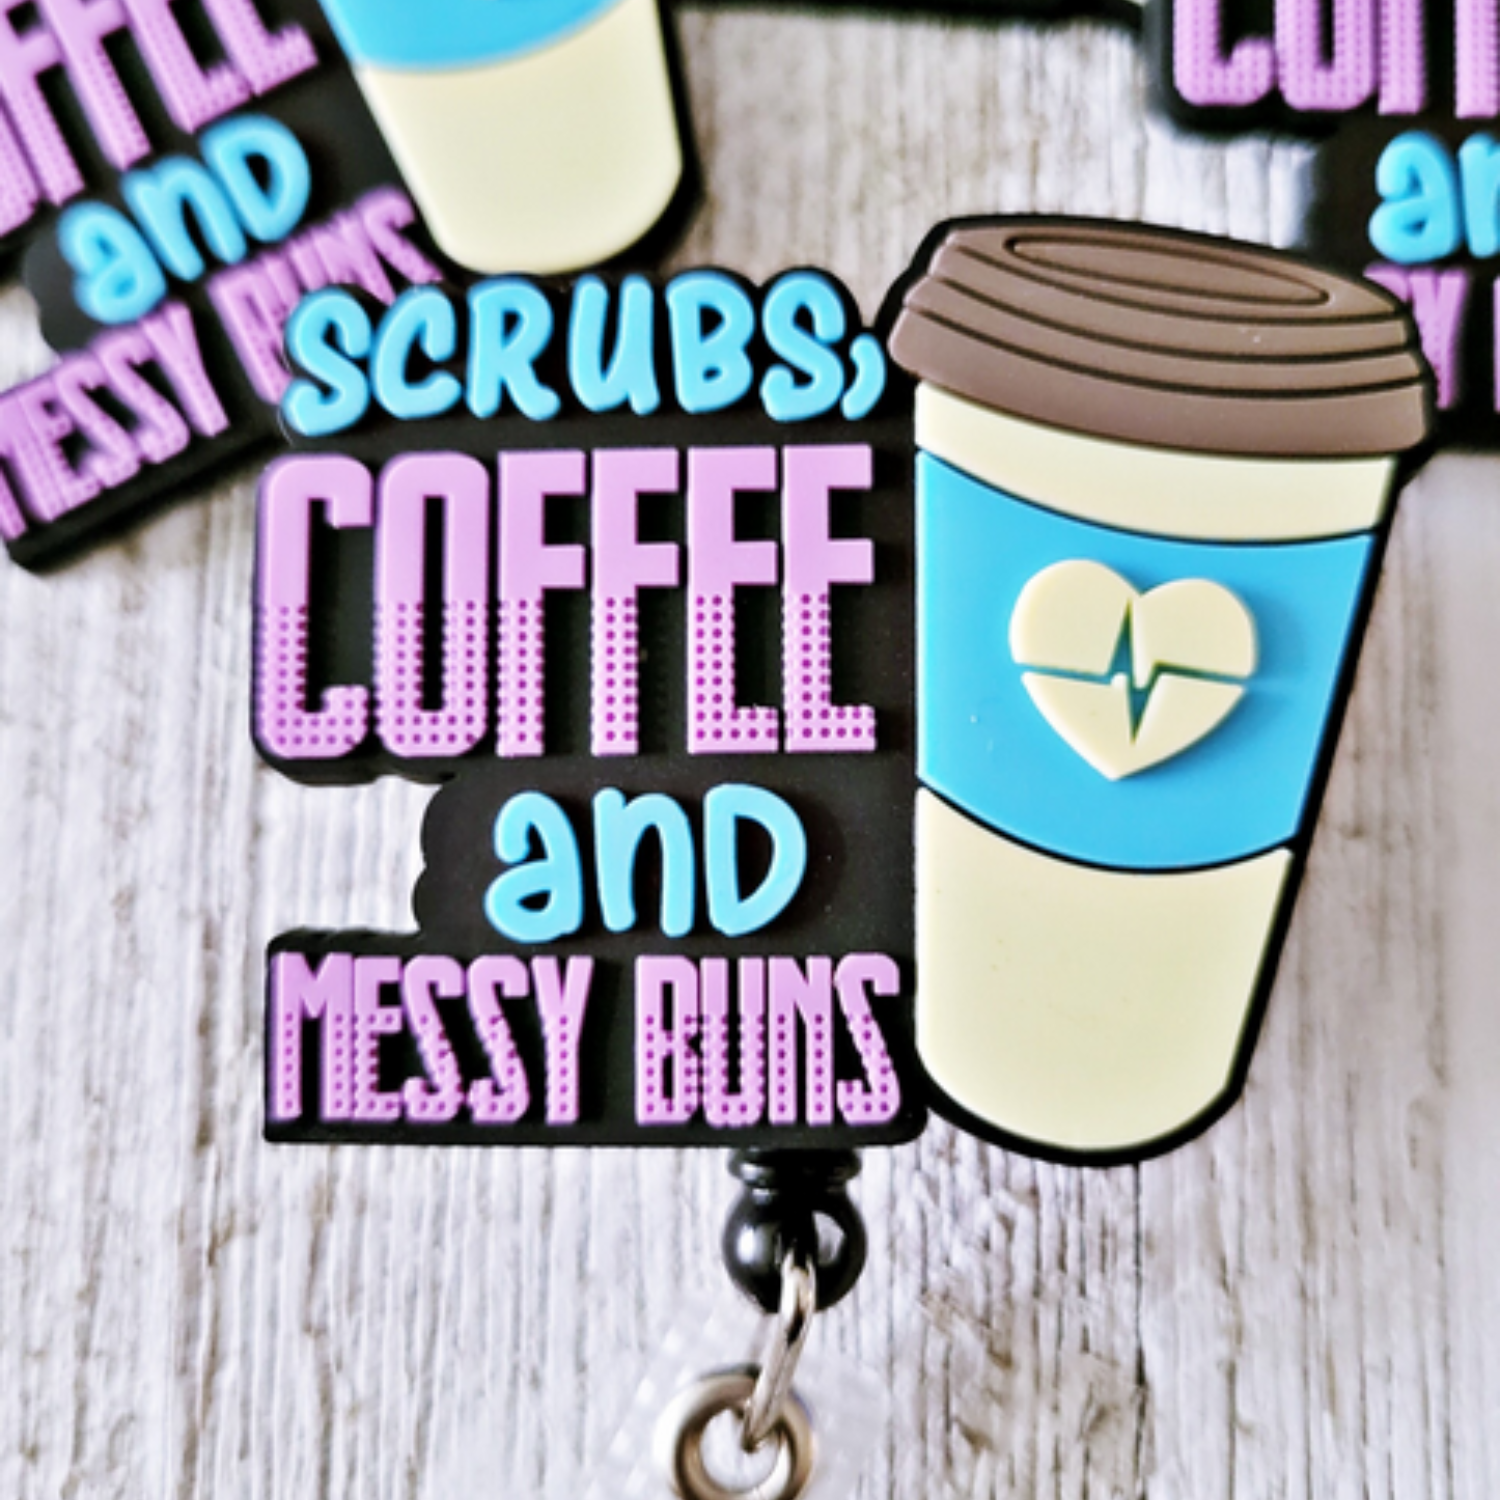 Scrubs Coffee and Messy Buns Badge Reel